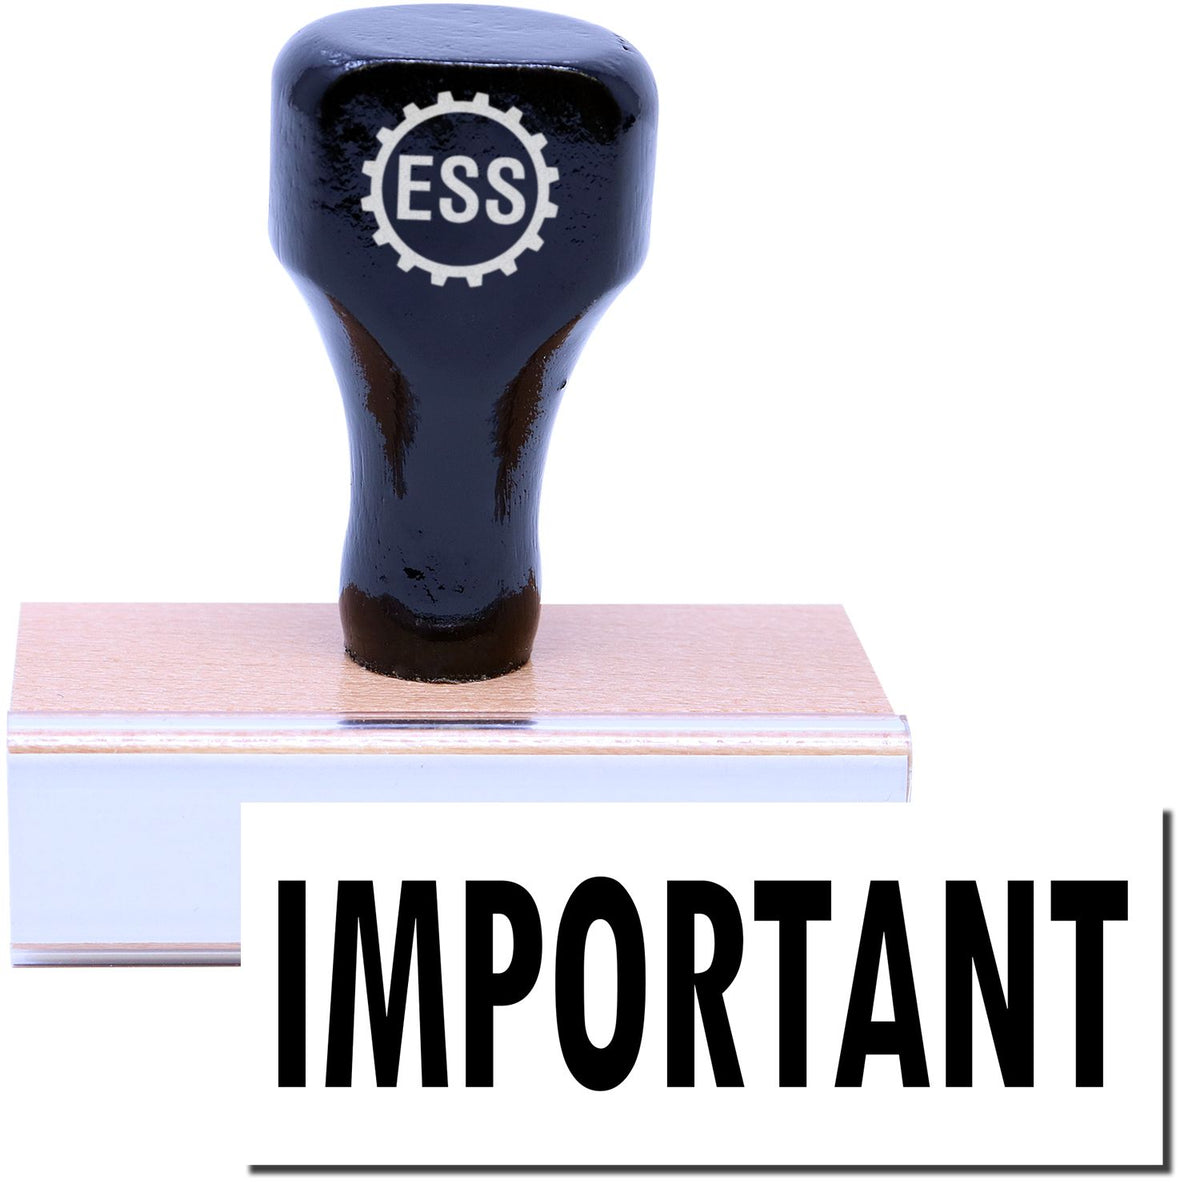 A stock office rubber stamp with a stamped image showing how the text &quot;IMPORTANT&quot; in a large font is displayed after stamping.